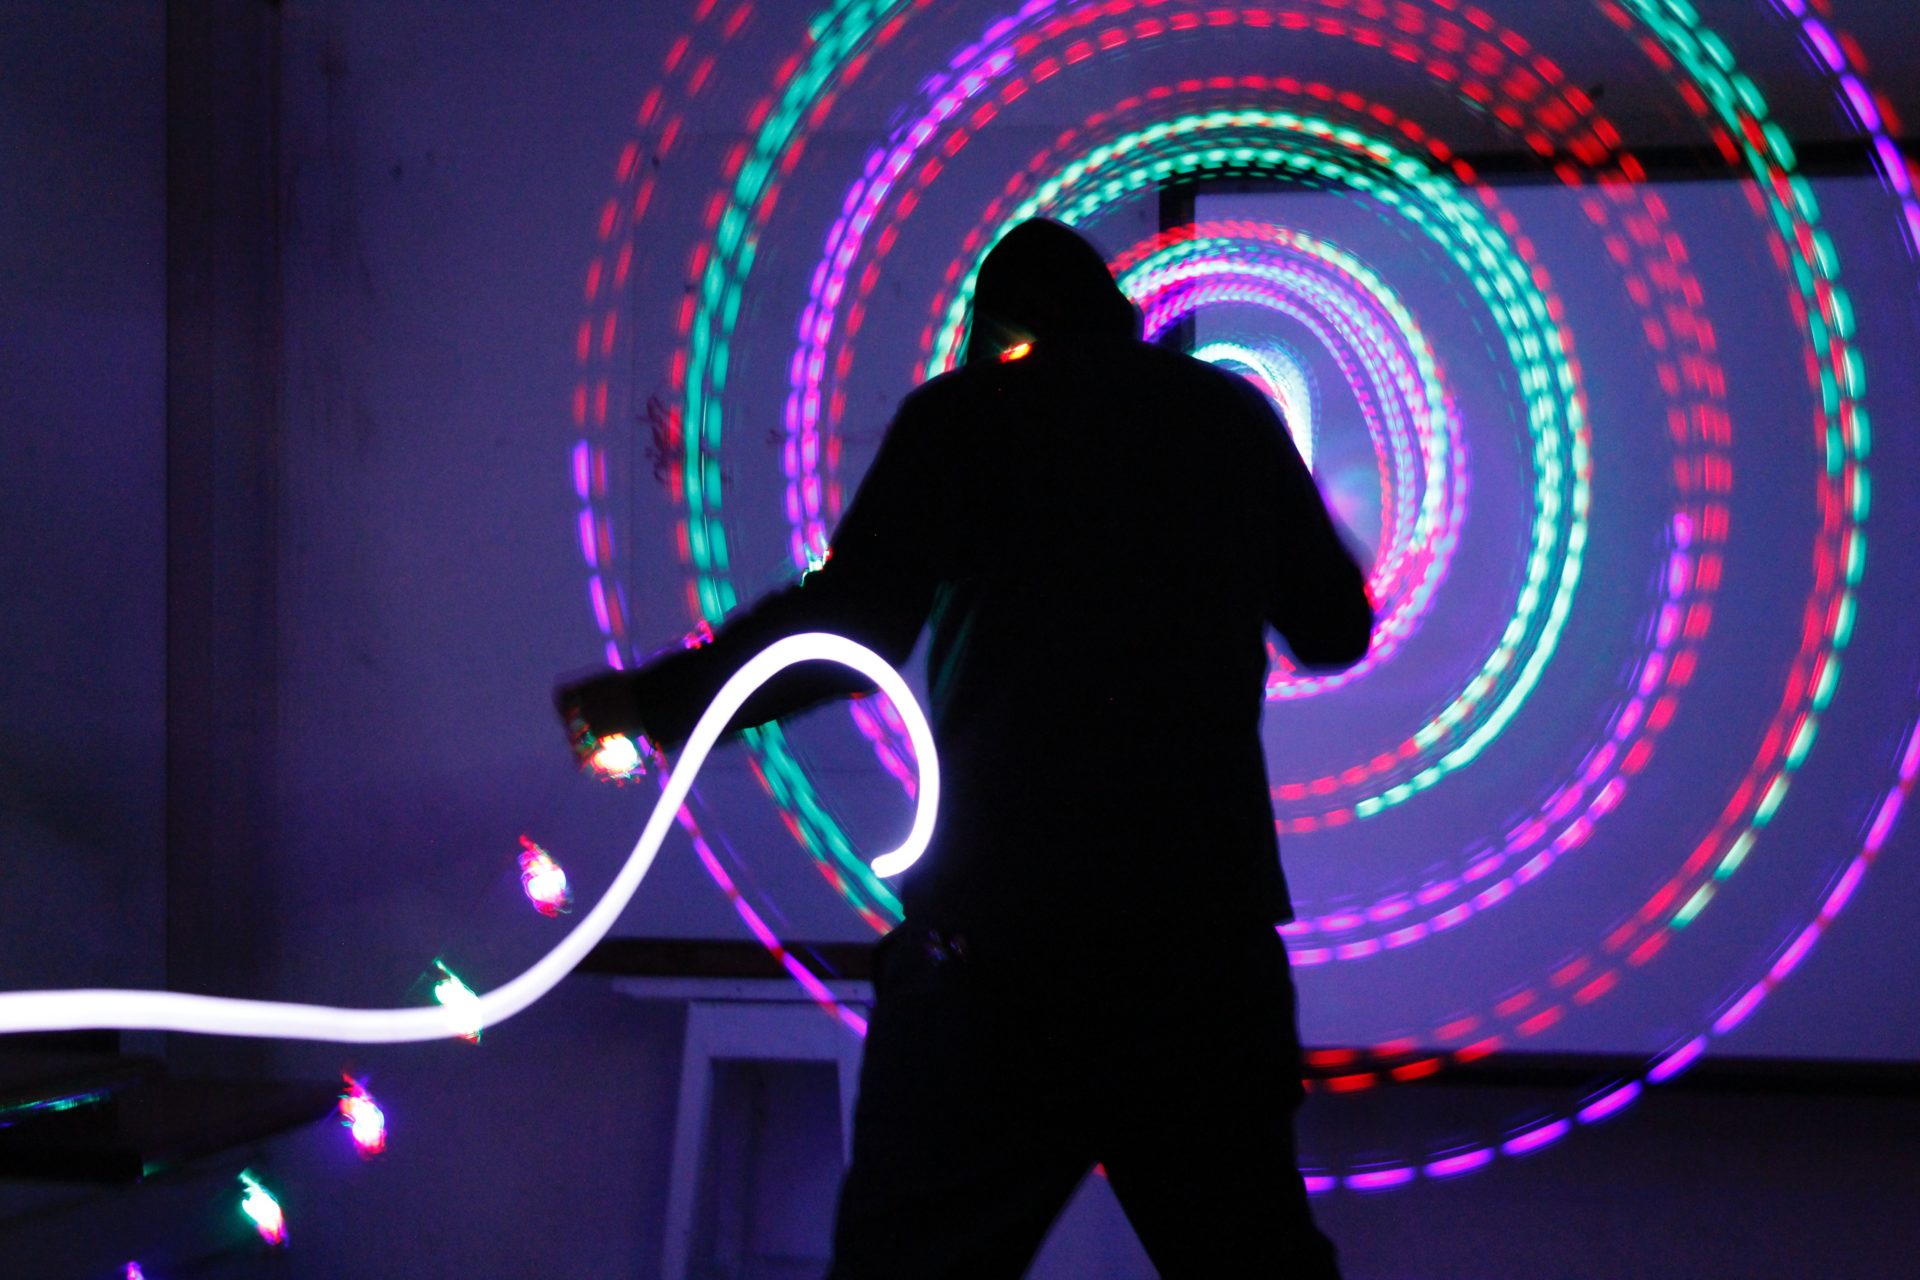 Silhouette of a person standing in front of coloured lights arranged in concentric circles